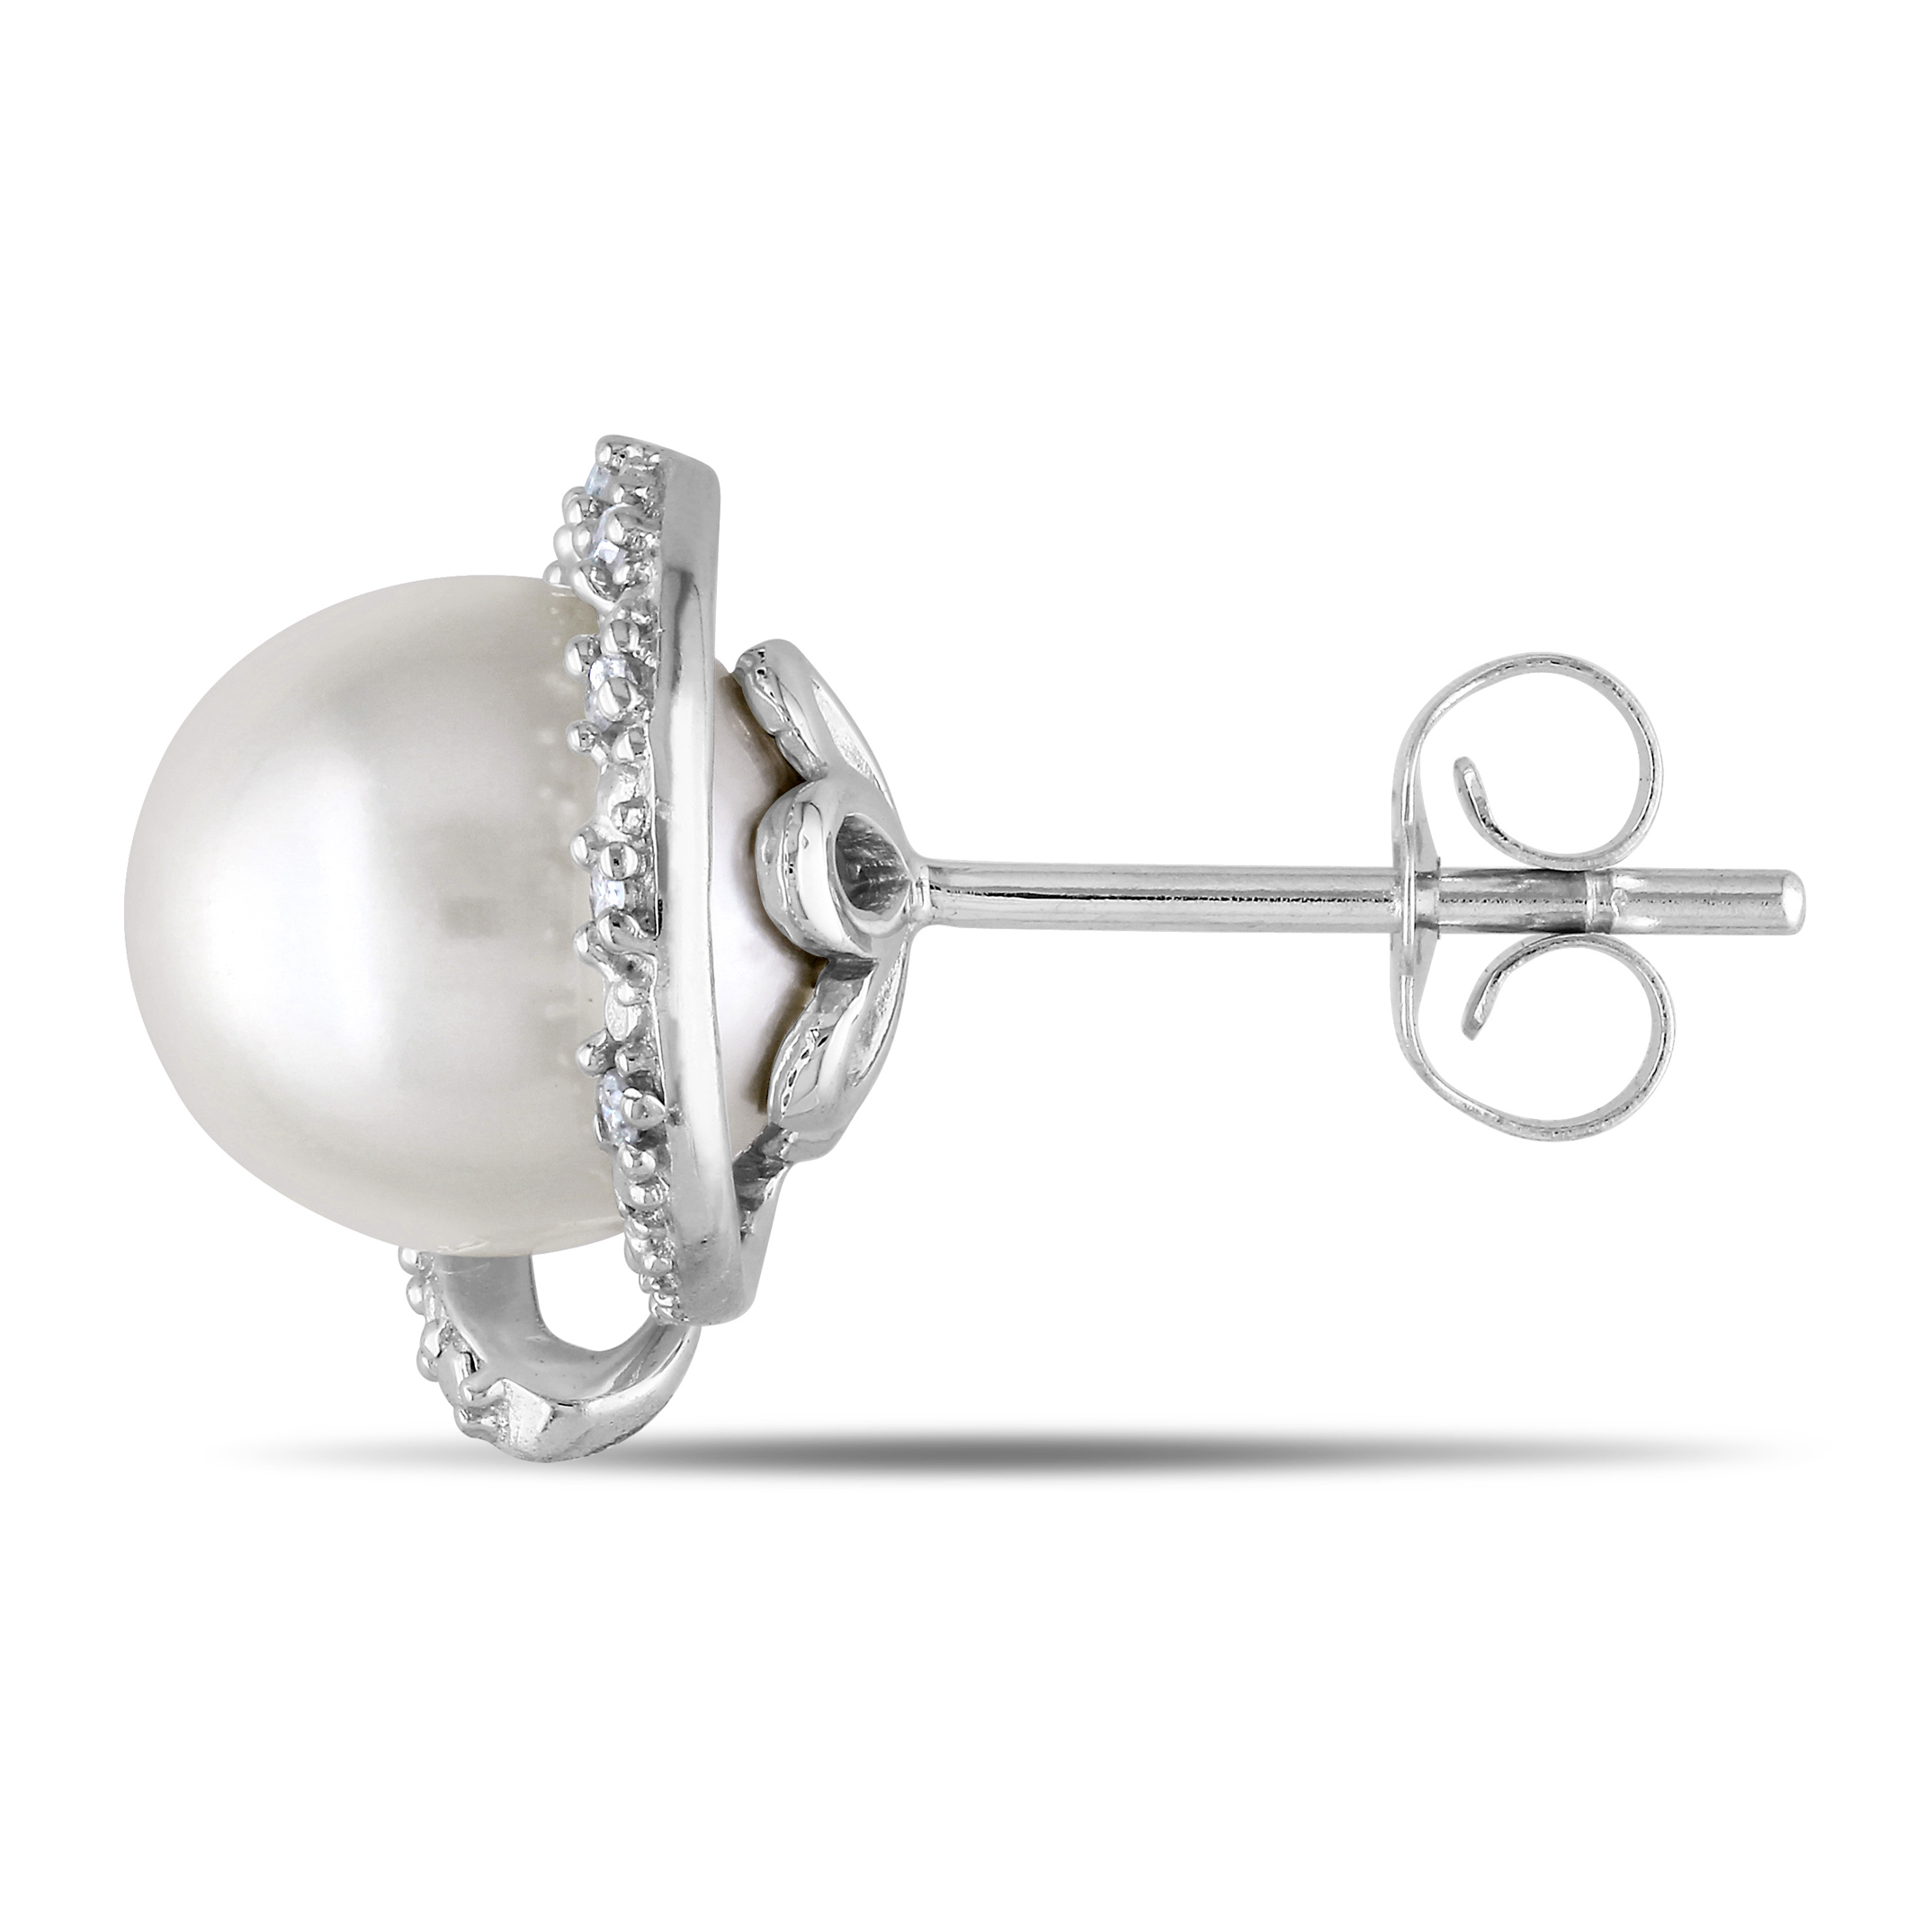 8 - 8.5 MM Cultured Freshwater Pearl and 1/10 CT TW Diamond Stud